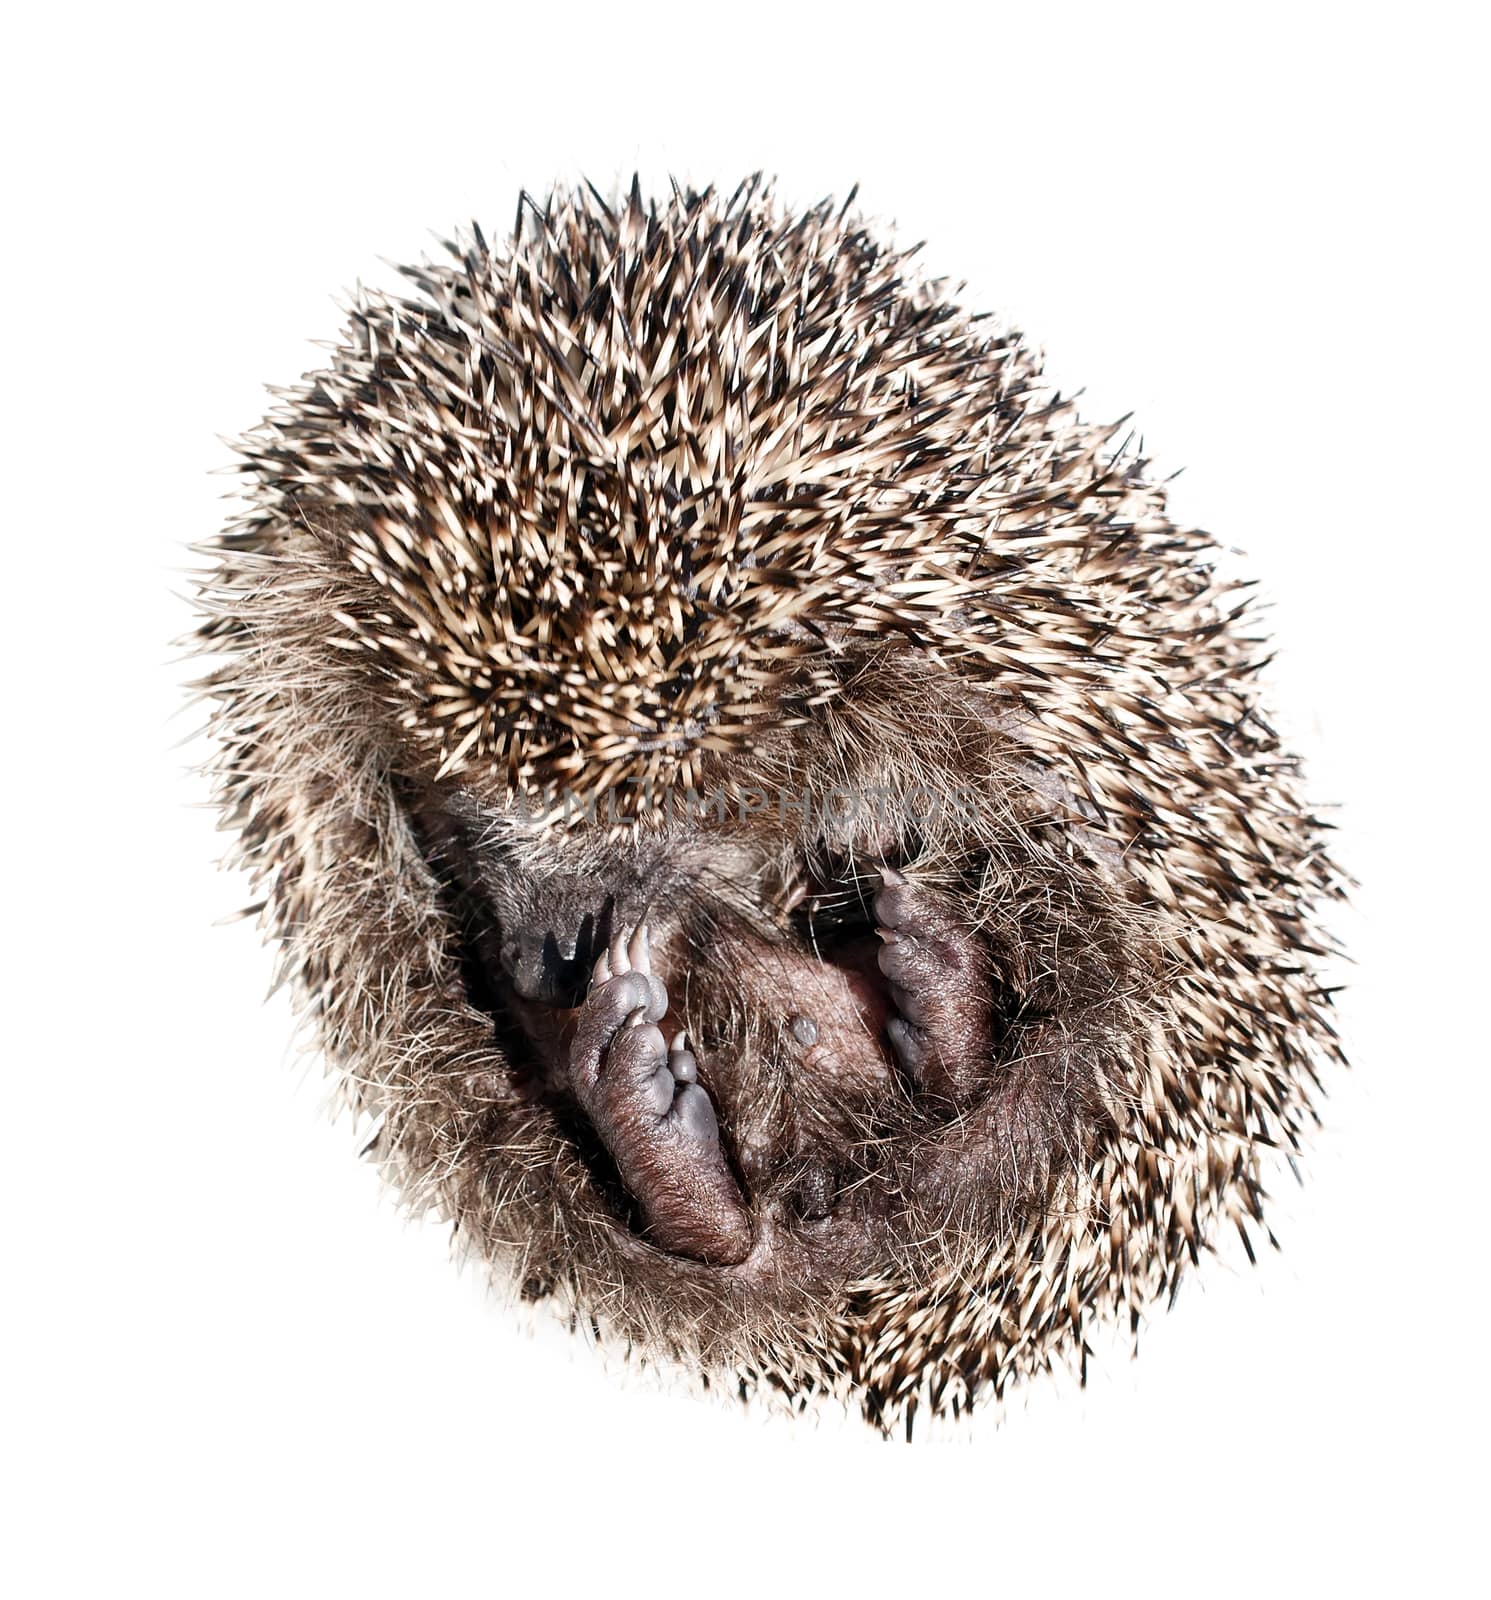 Hedgehog curled up into a ball by Krakatuk